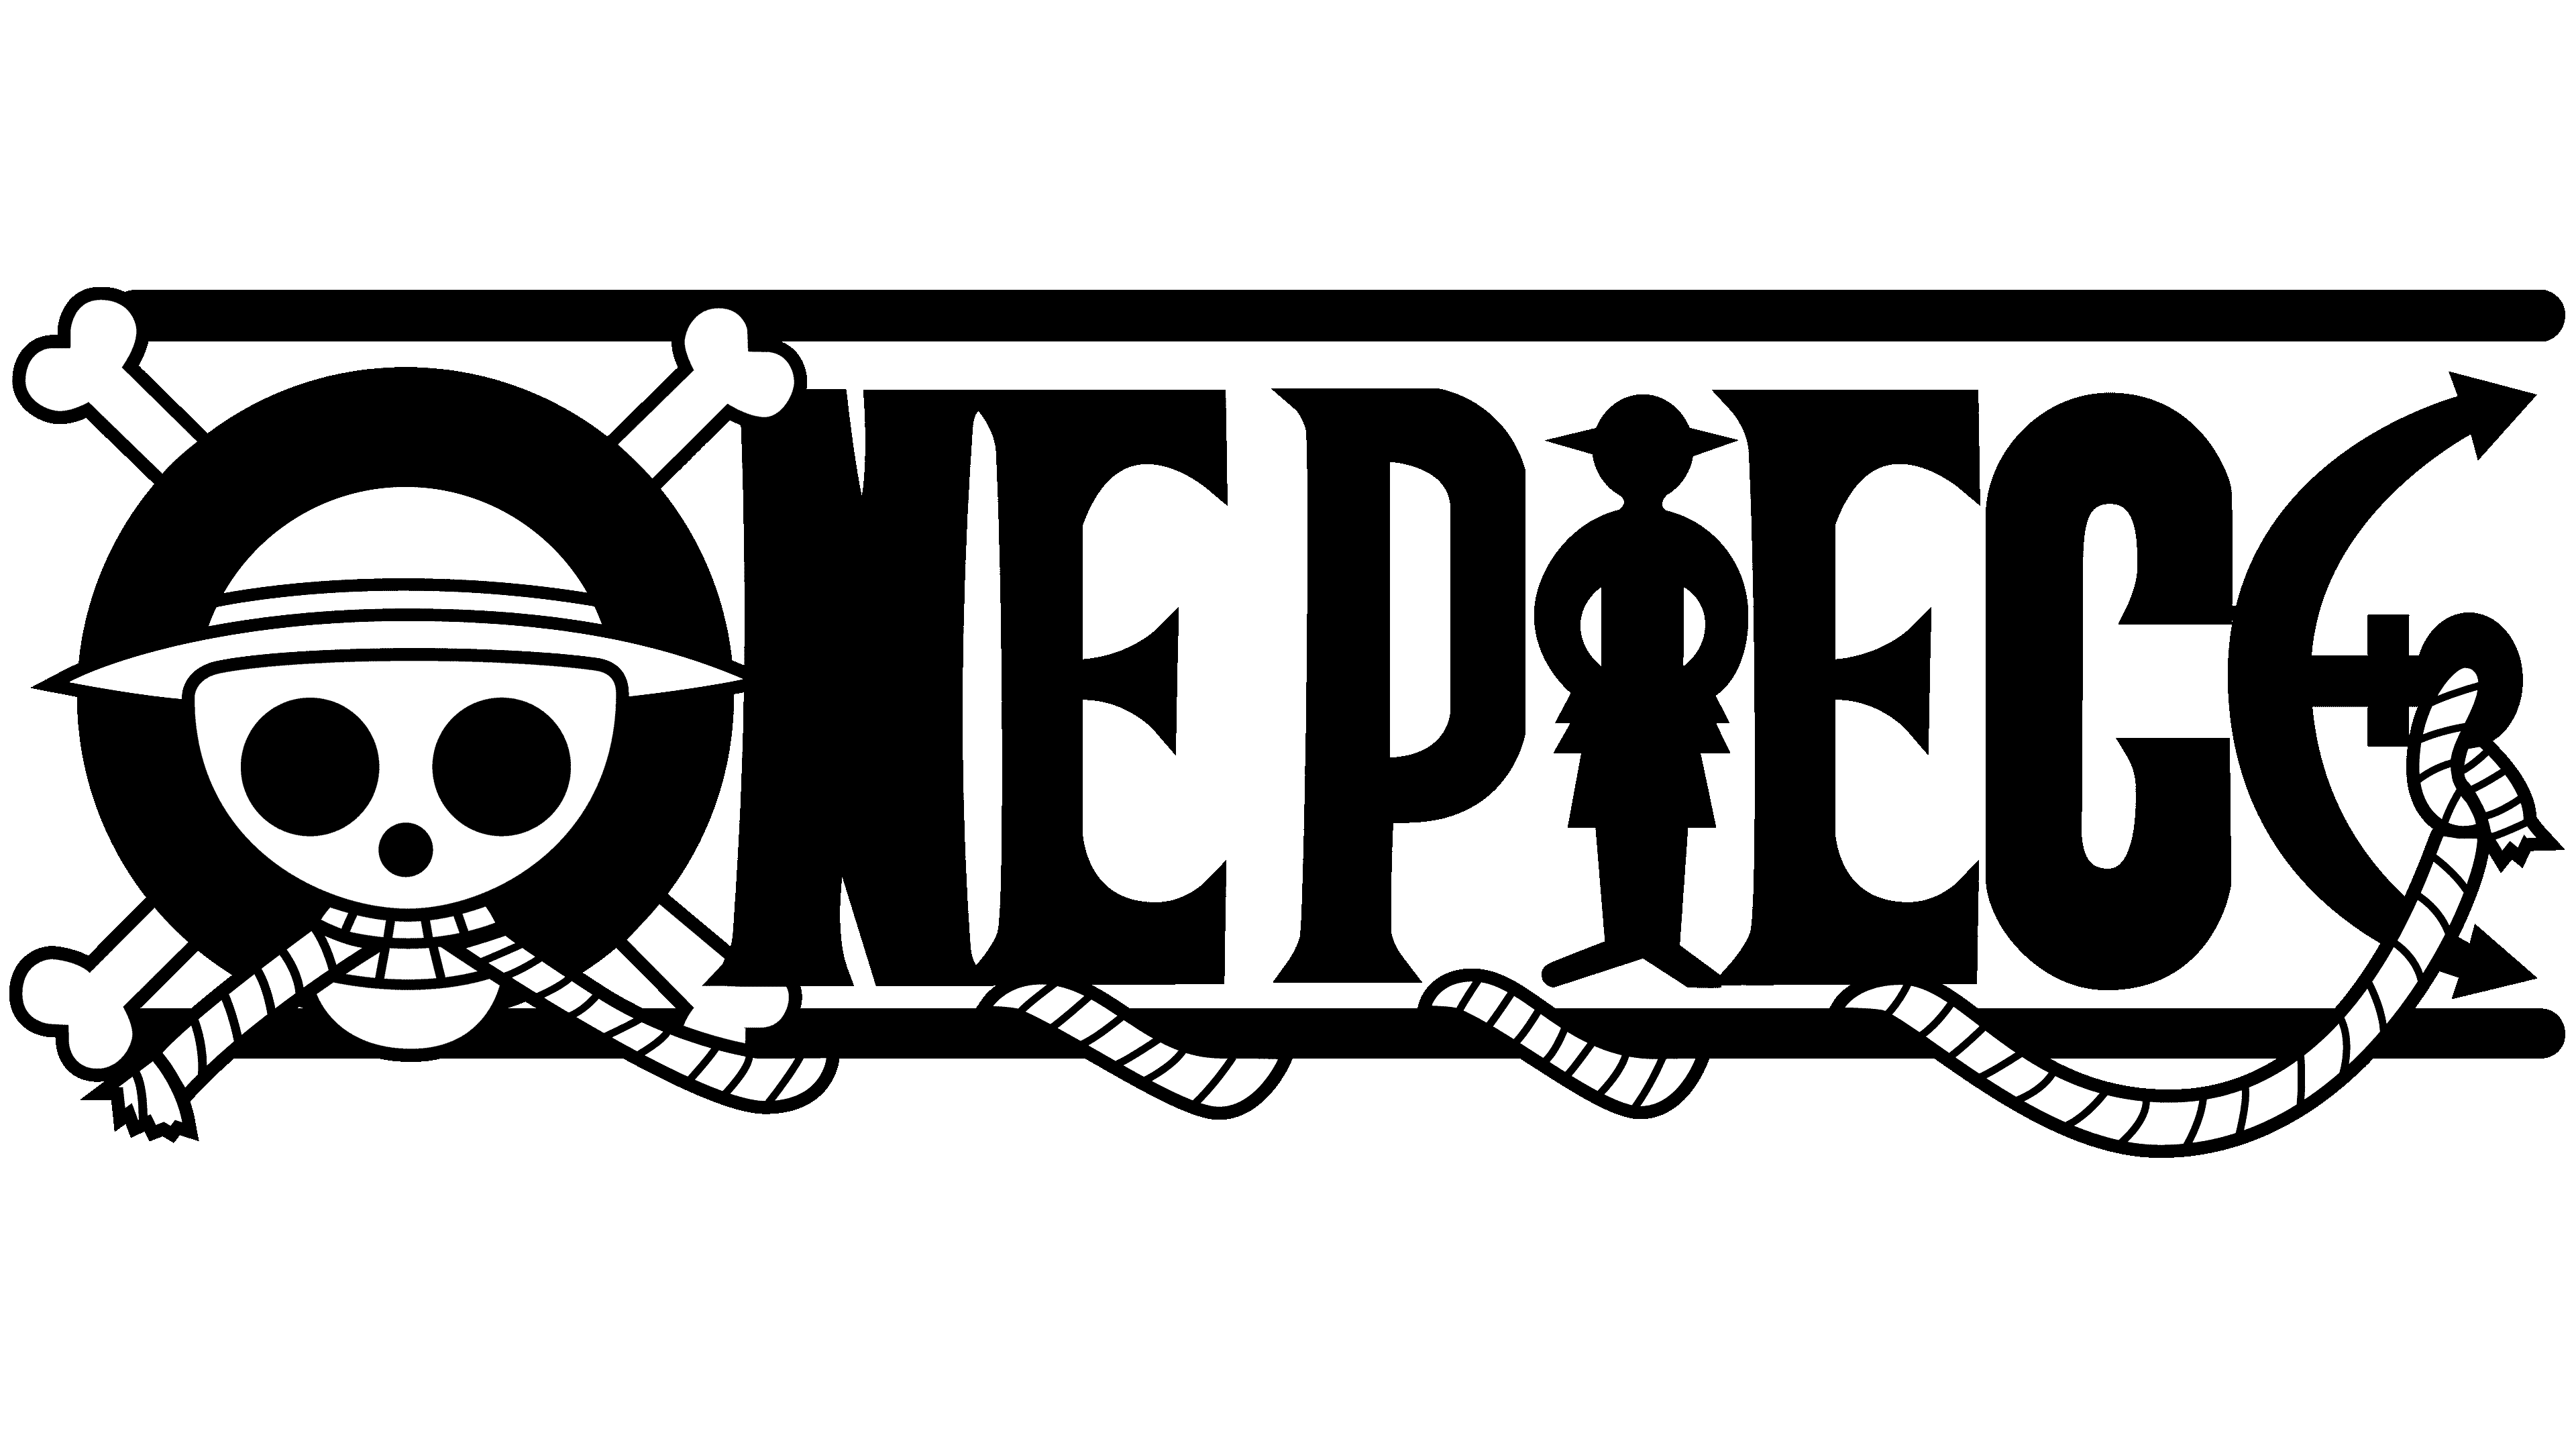 One Piece Logo Wallpaper (65+ images)